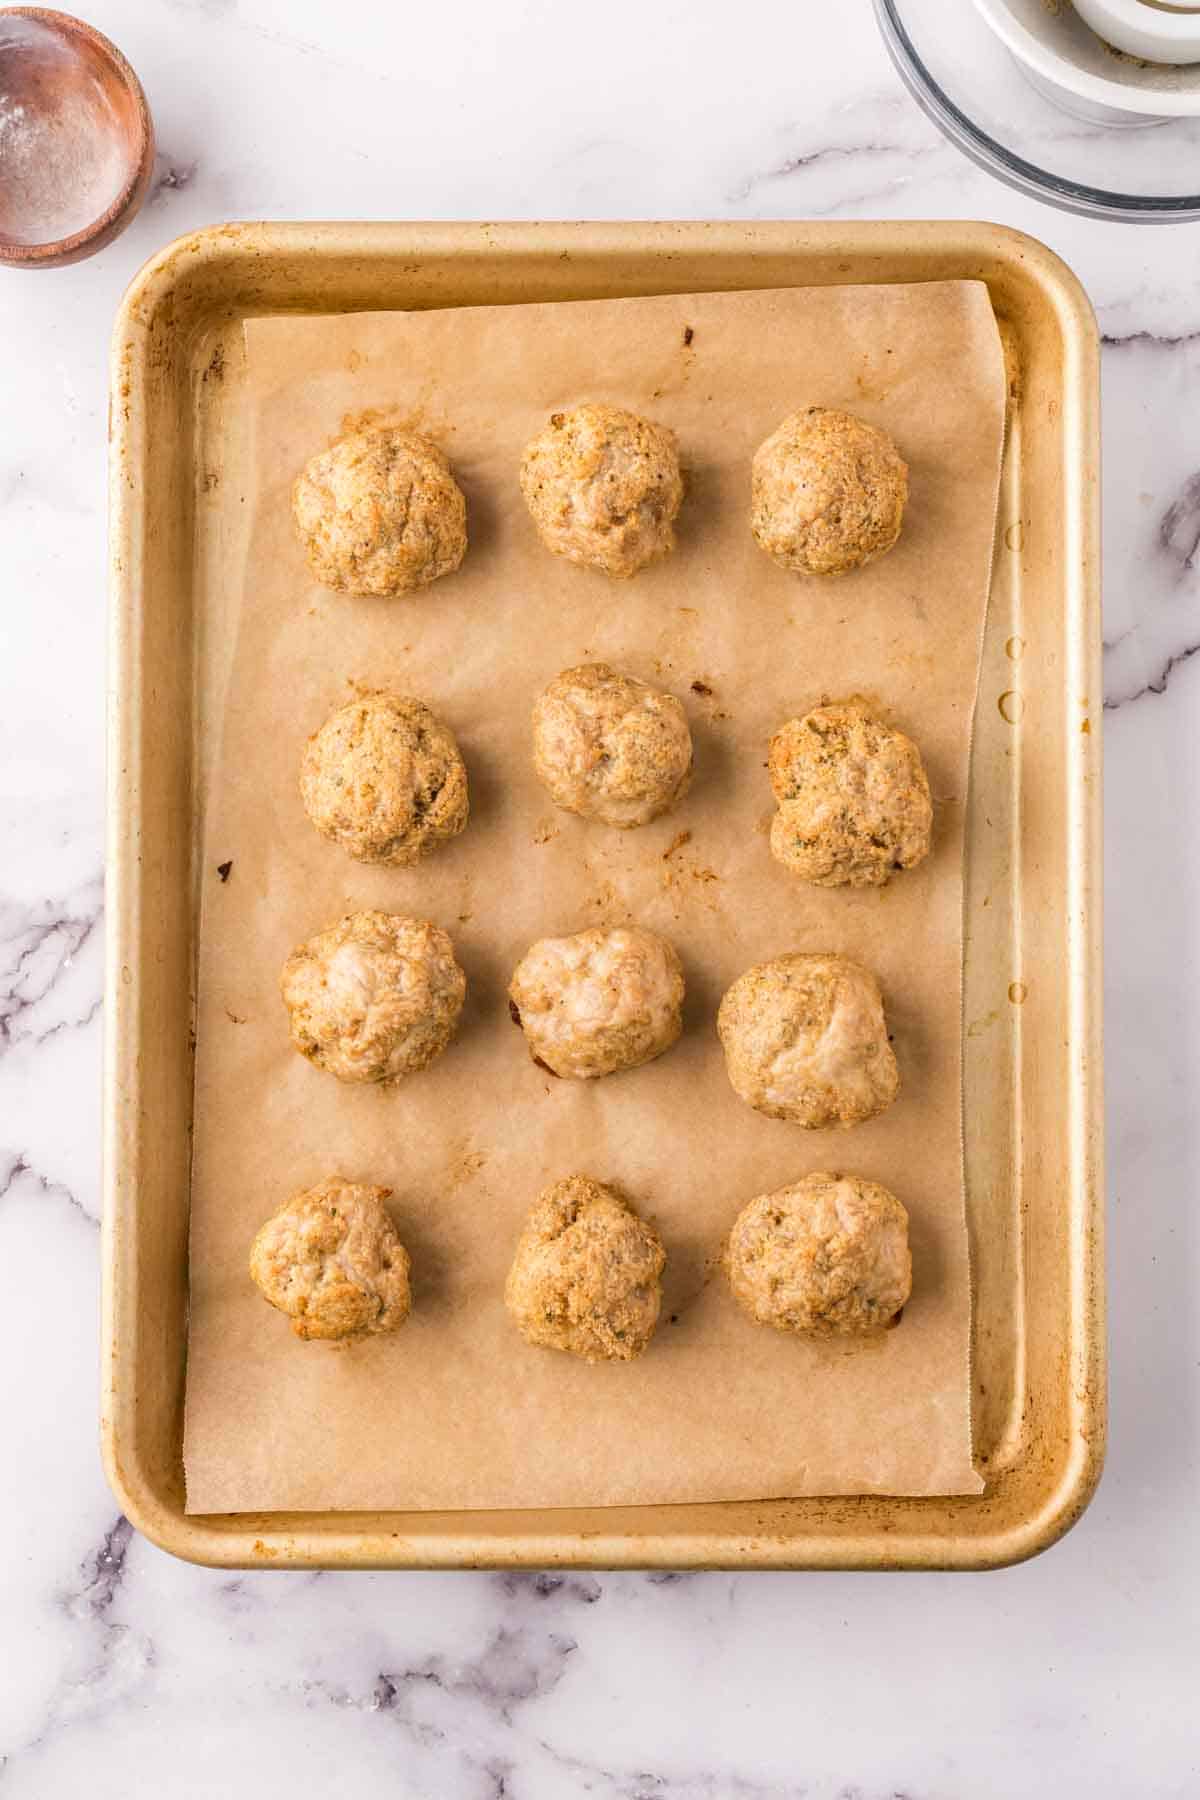 chicken meatballs lined on parchment on a baking tray.